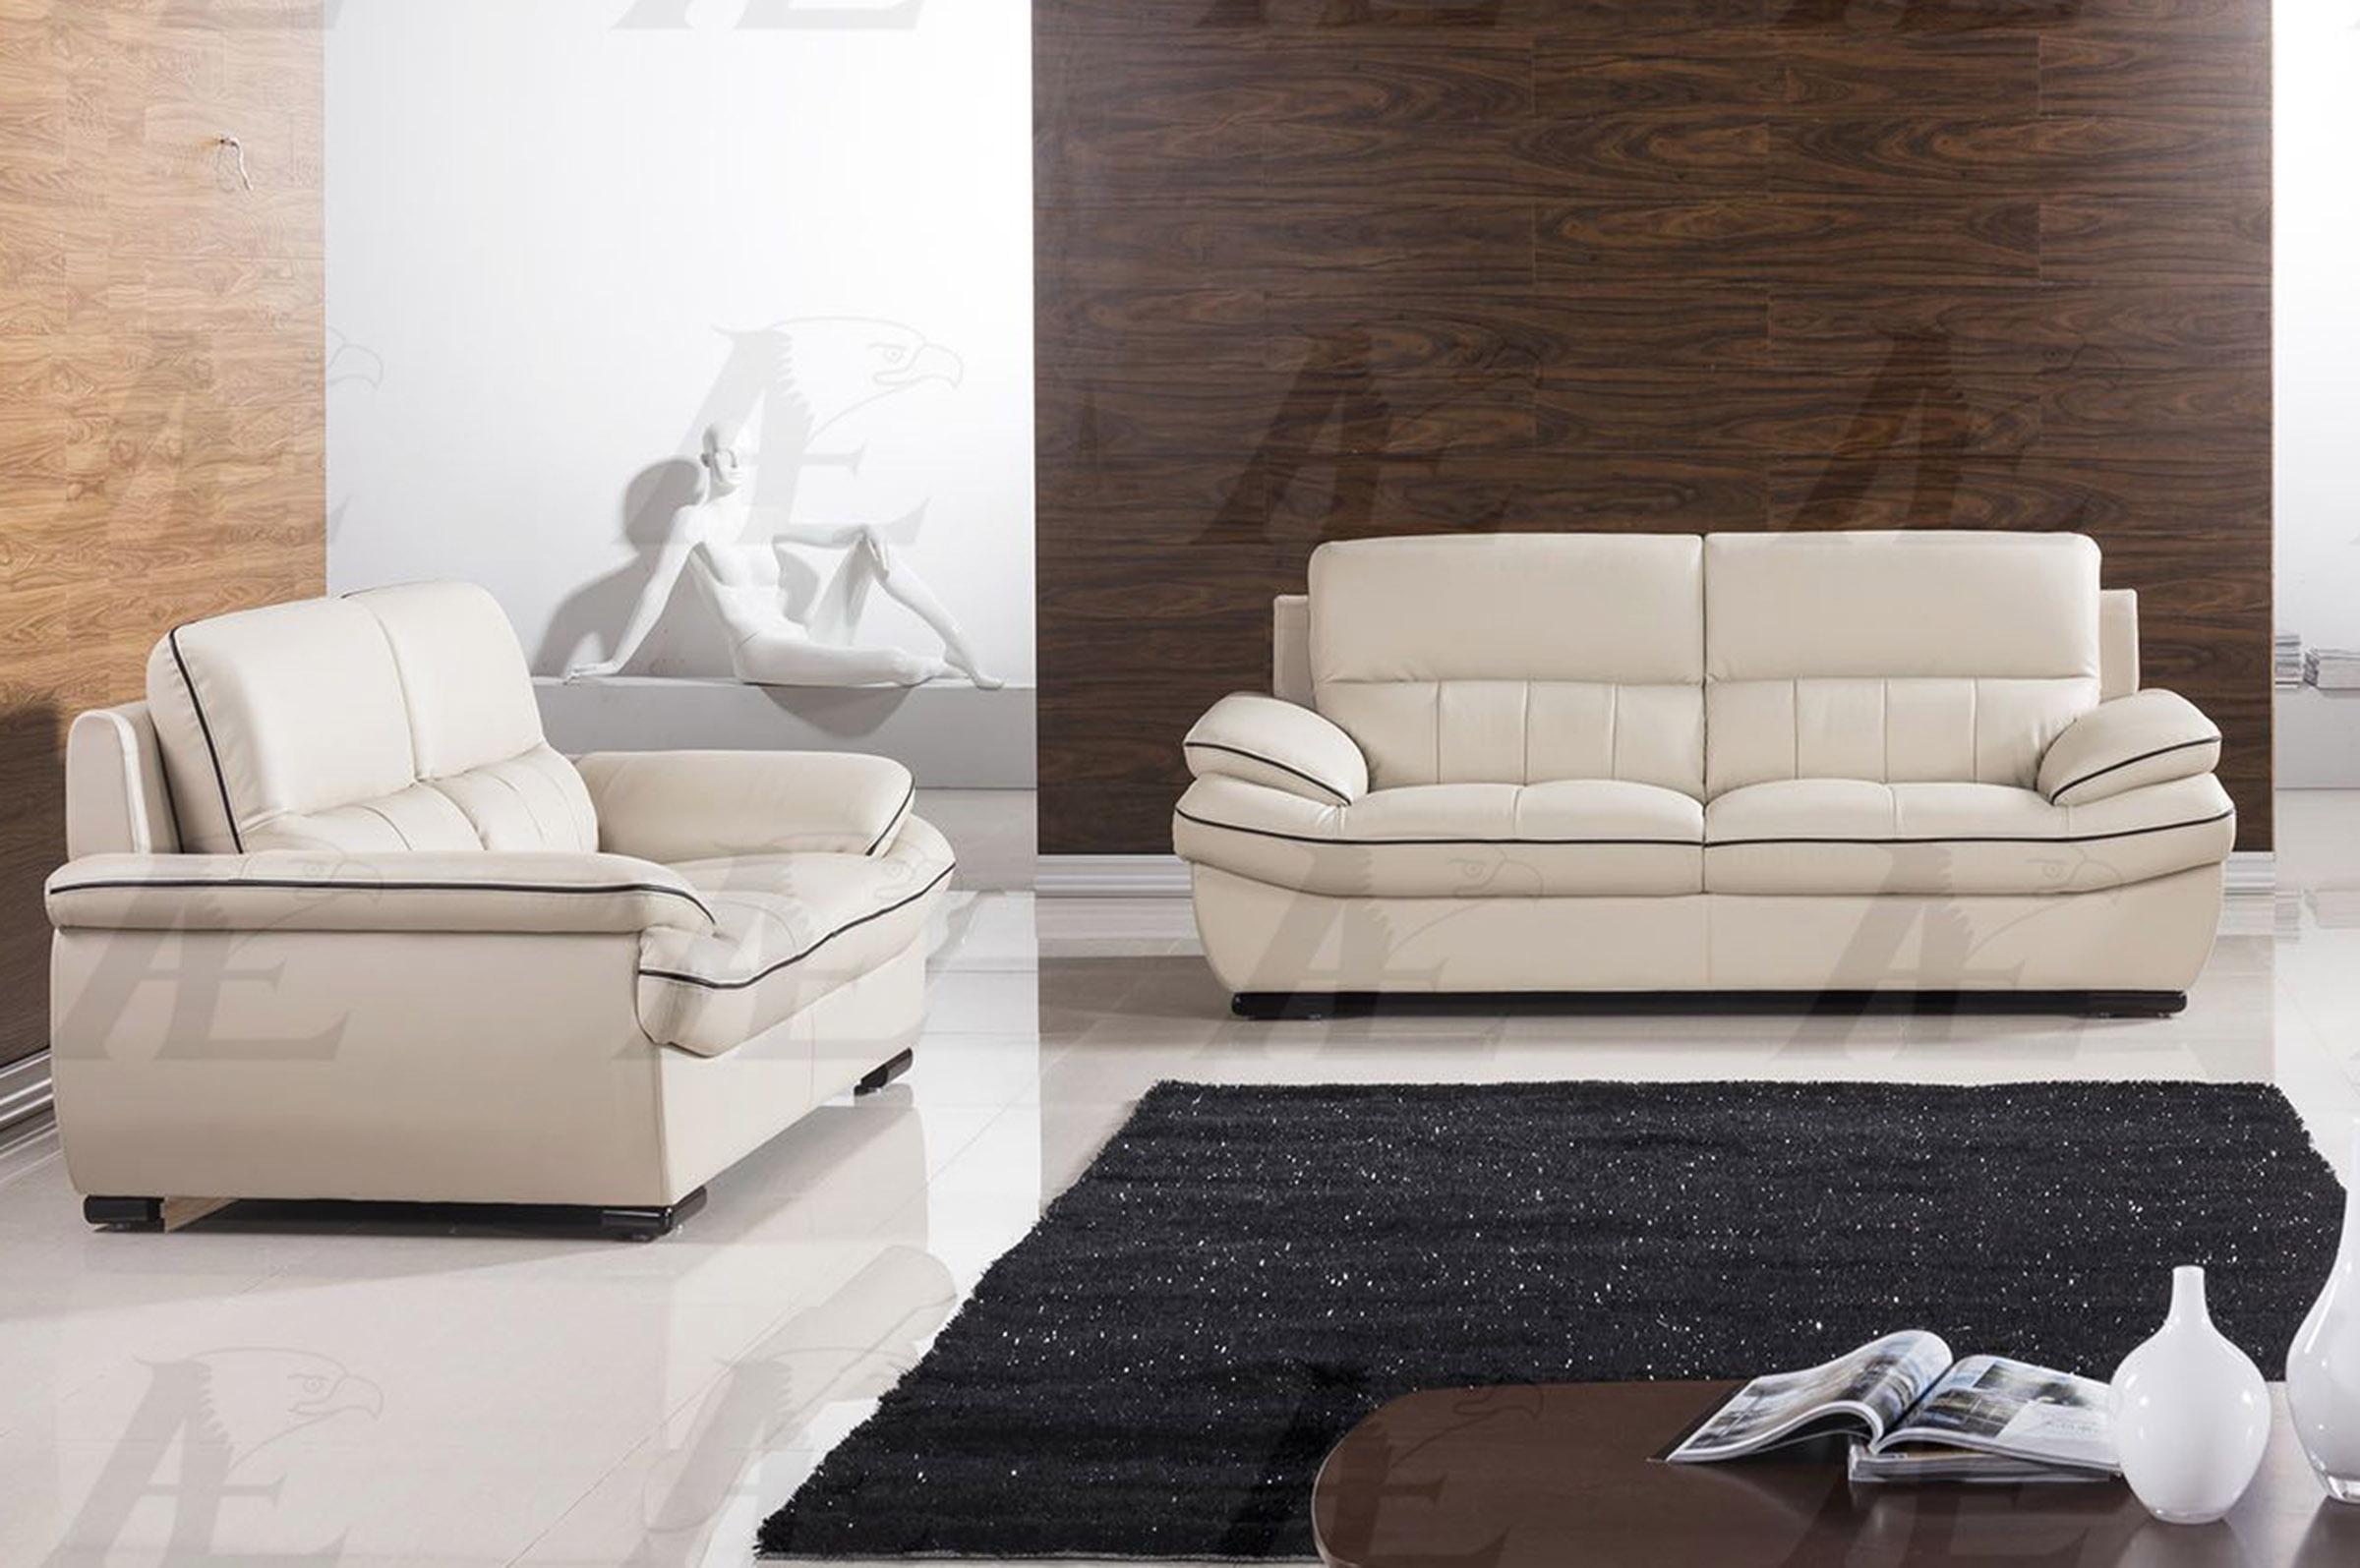 Modern Sofa Set EK-B305-LG.BK-SF EK-B305-LG.BK-SF-Set-2 in Light Gray Genuine Leather